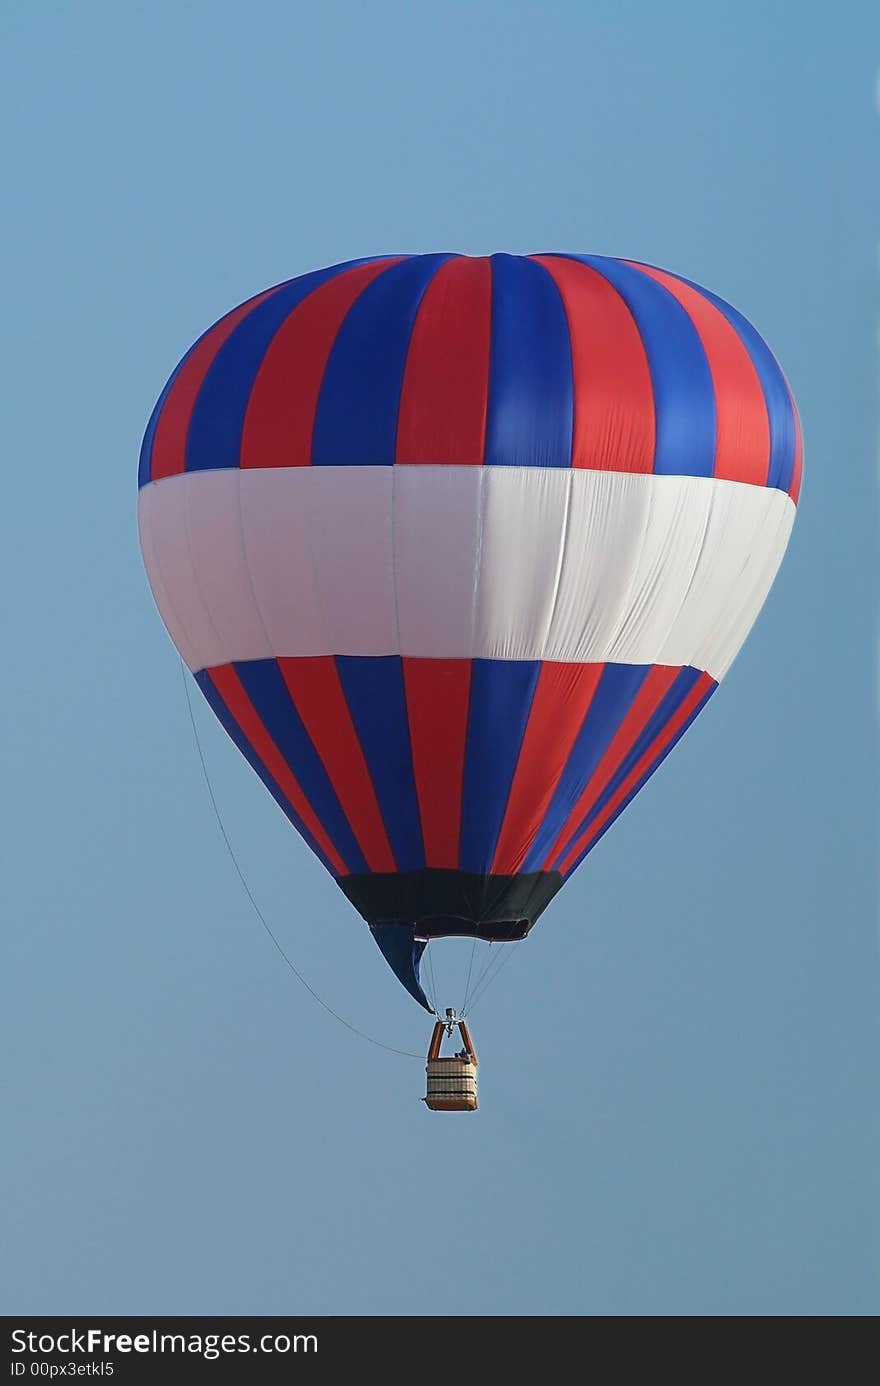 Red, white and blue, un-manned hot-air balloon flying.